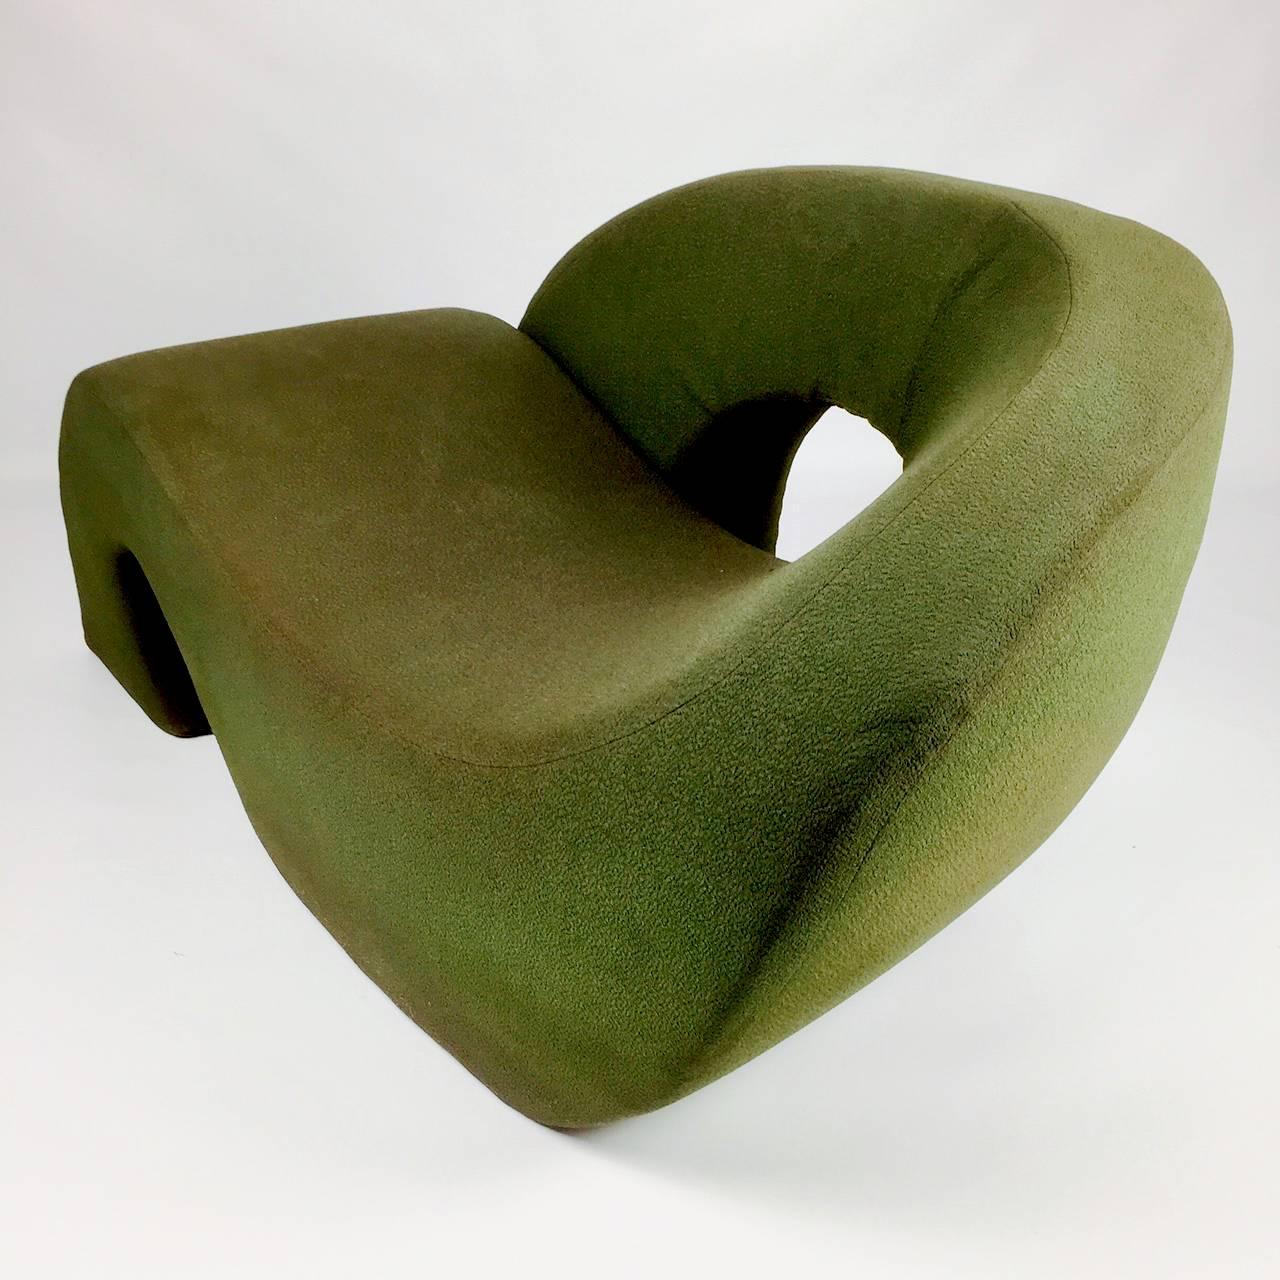 Sculptural 'Sess' lounge chair designed by Nani Prina in 1968 for Sormani, Italy.
Polyurethane foam with the original green fabric. Printed 'Sormani on the underside. 

Literature:
Albrecht Bangert, Italienisches Möbeldesign, Munich, 1985, p.